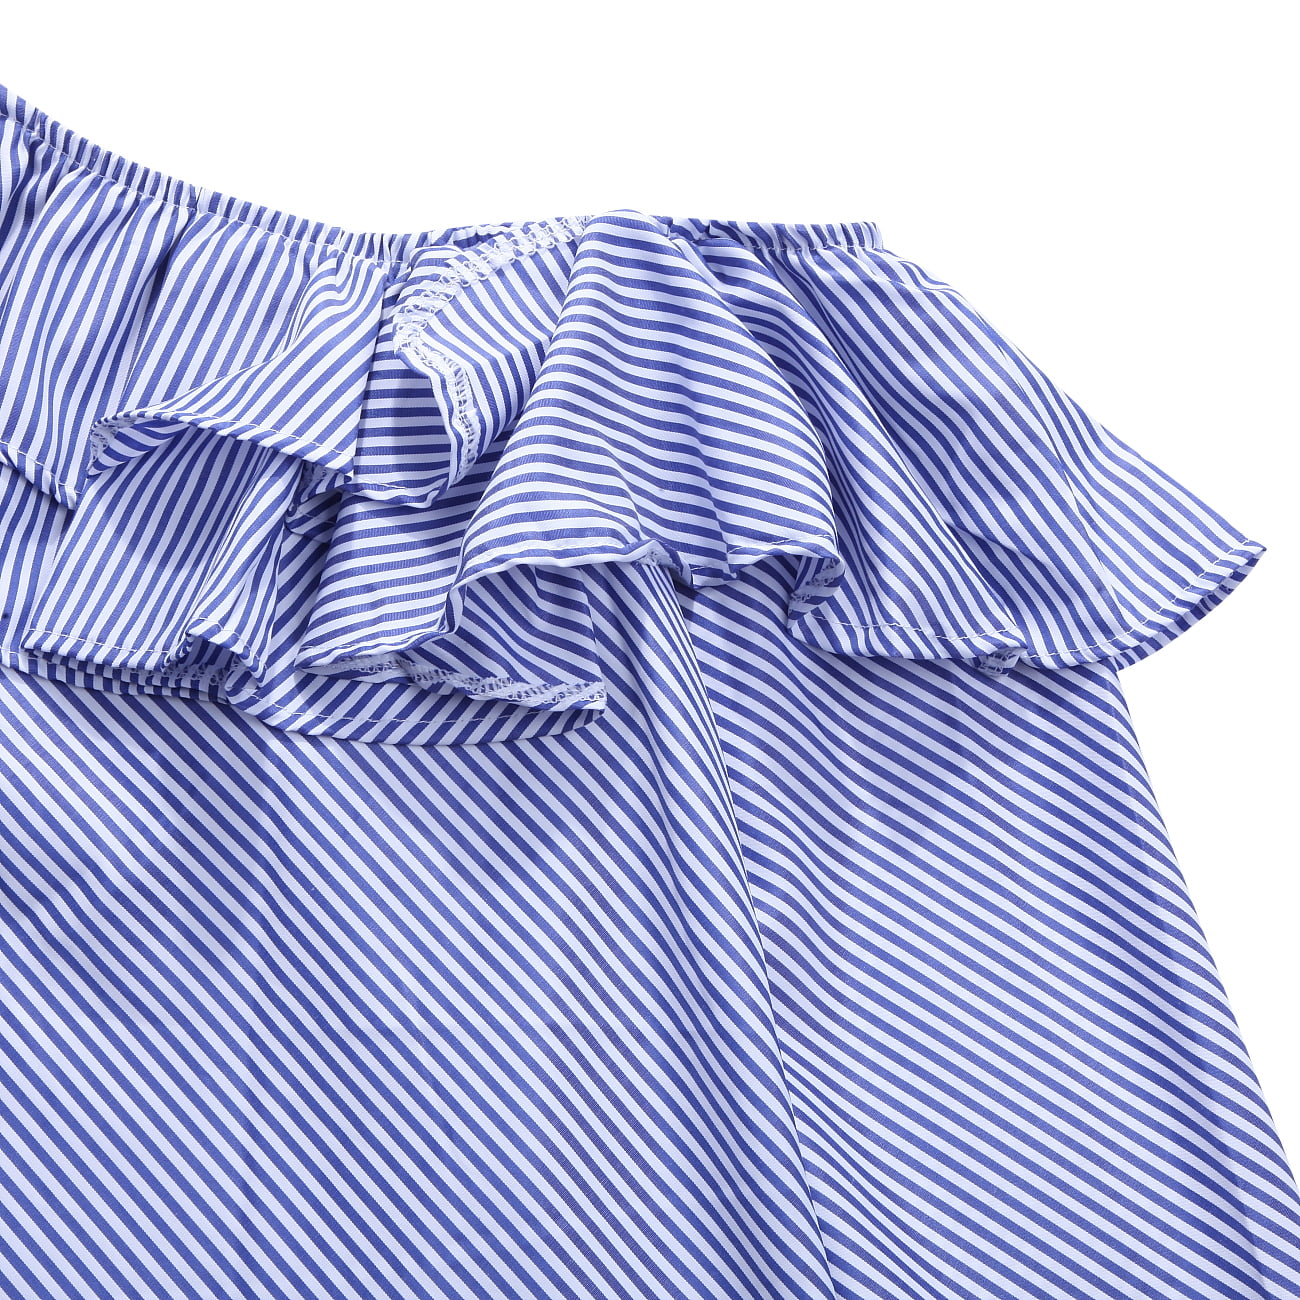 Binpure Women Spring Shirt, Striped and Ruffled Layers One Shoulder Off Tops